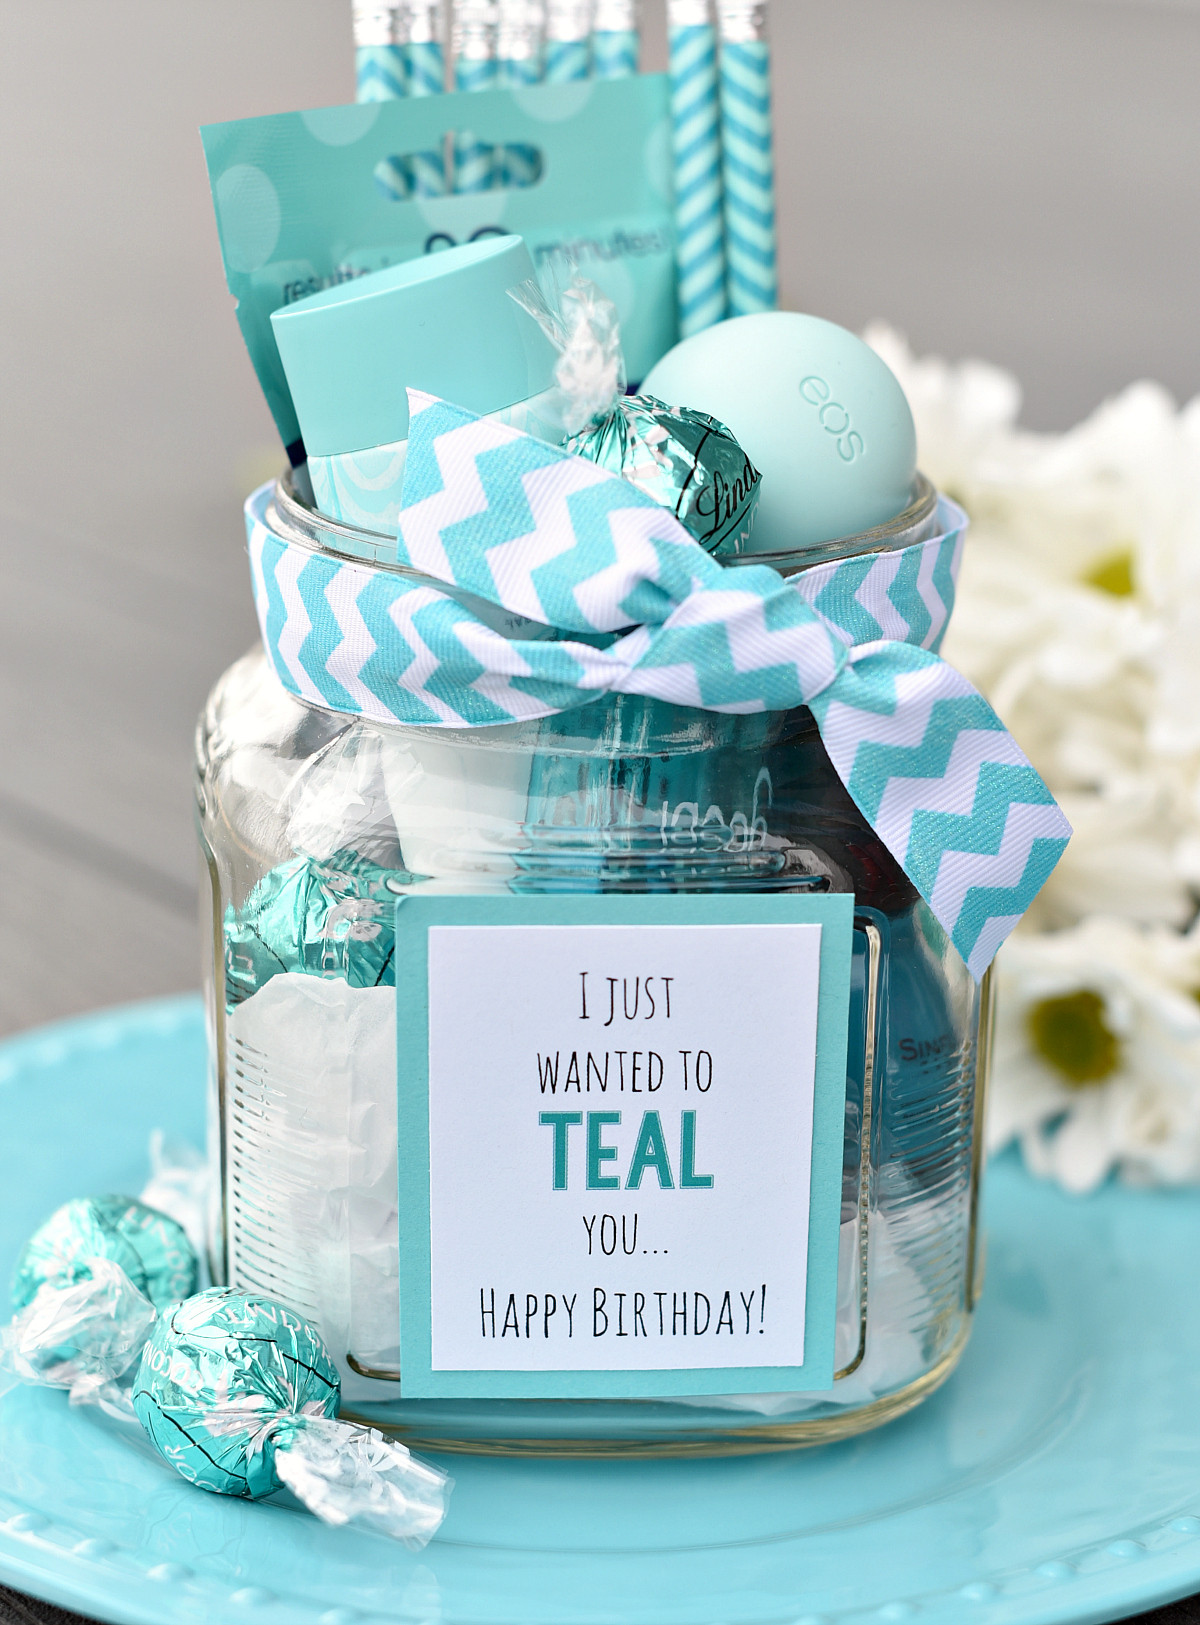 Cute Gift Basket Ideas
 Teal Birthday Gift Idea for Friends – Fun Squared